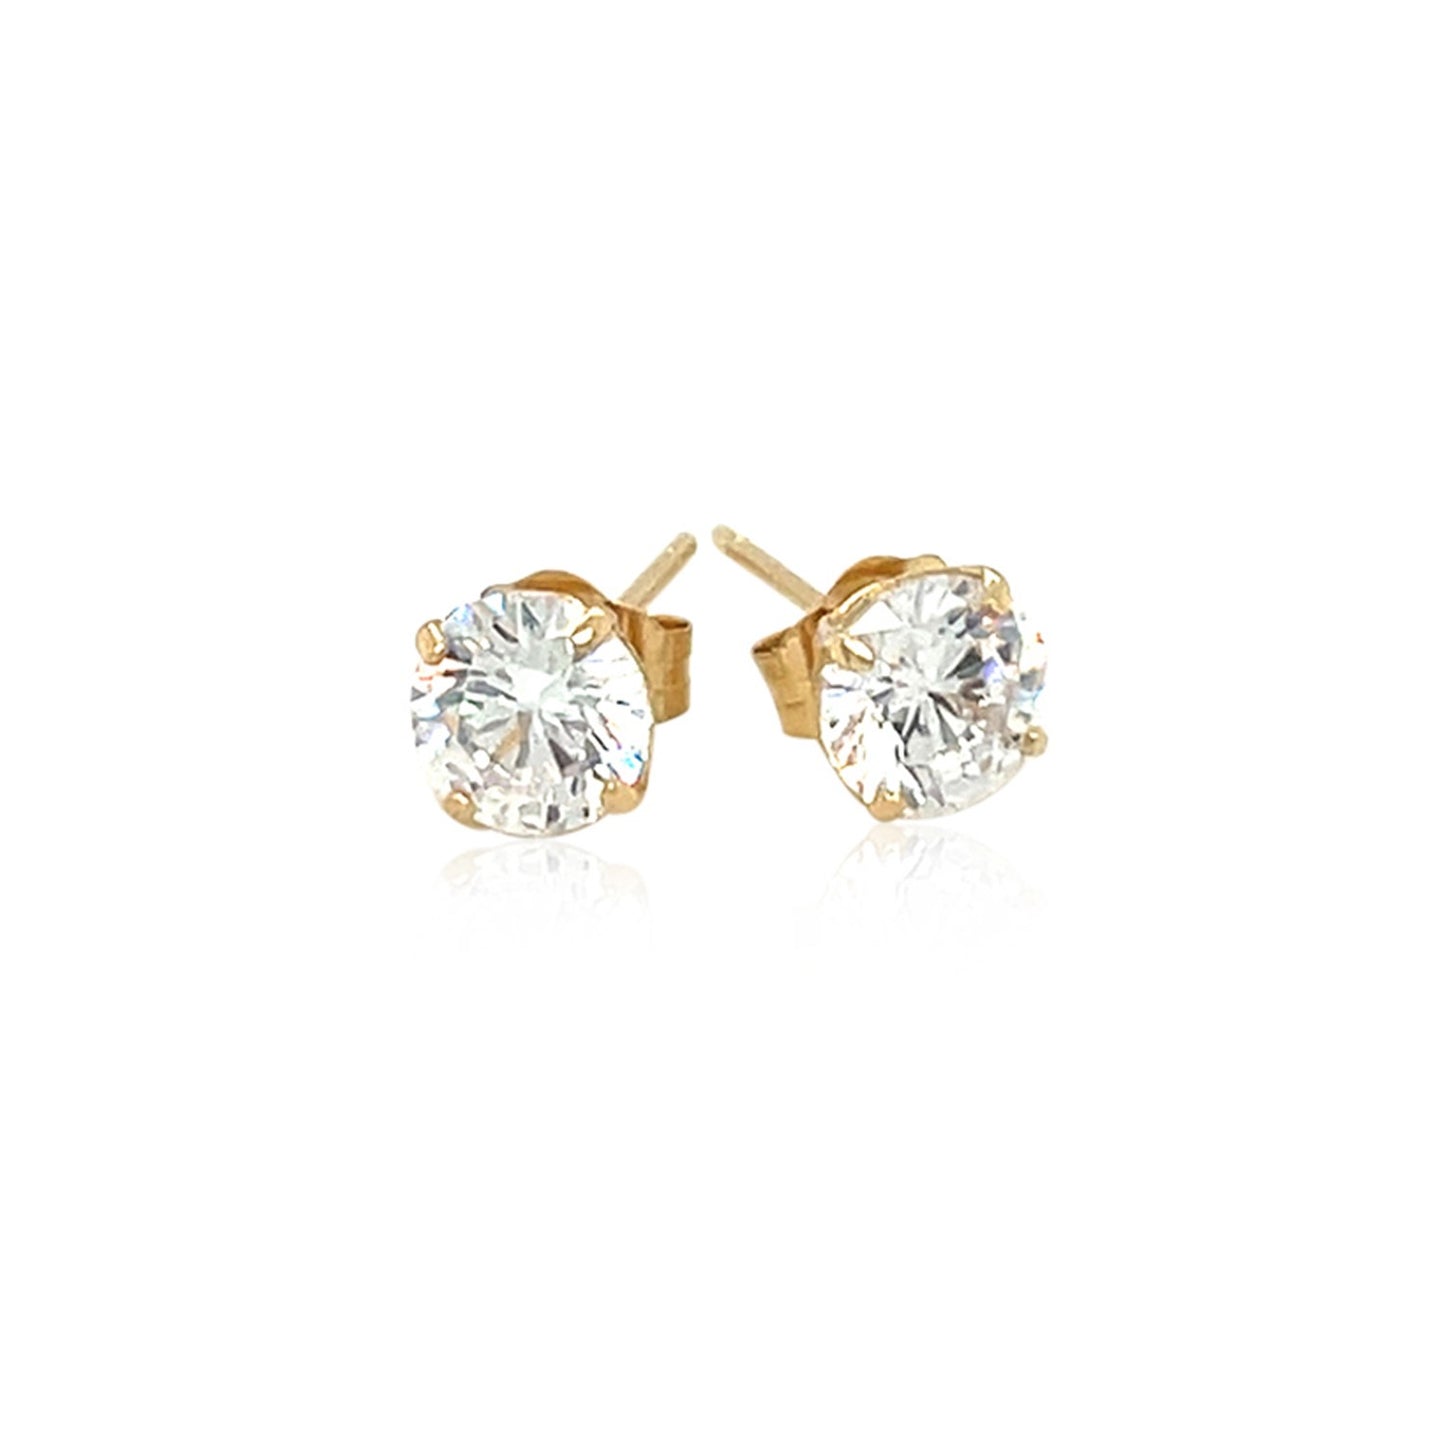 14k Yellow Gold 5mm Stud Earrings with White Hue Faceted Cubic Zirconia